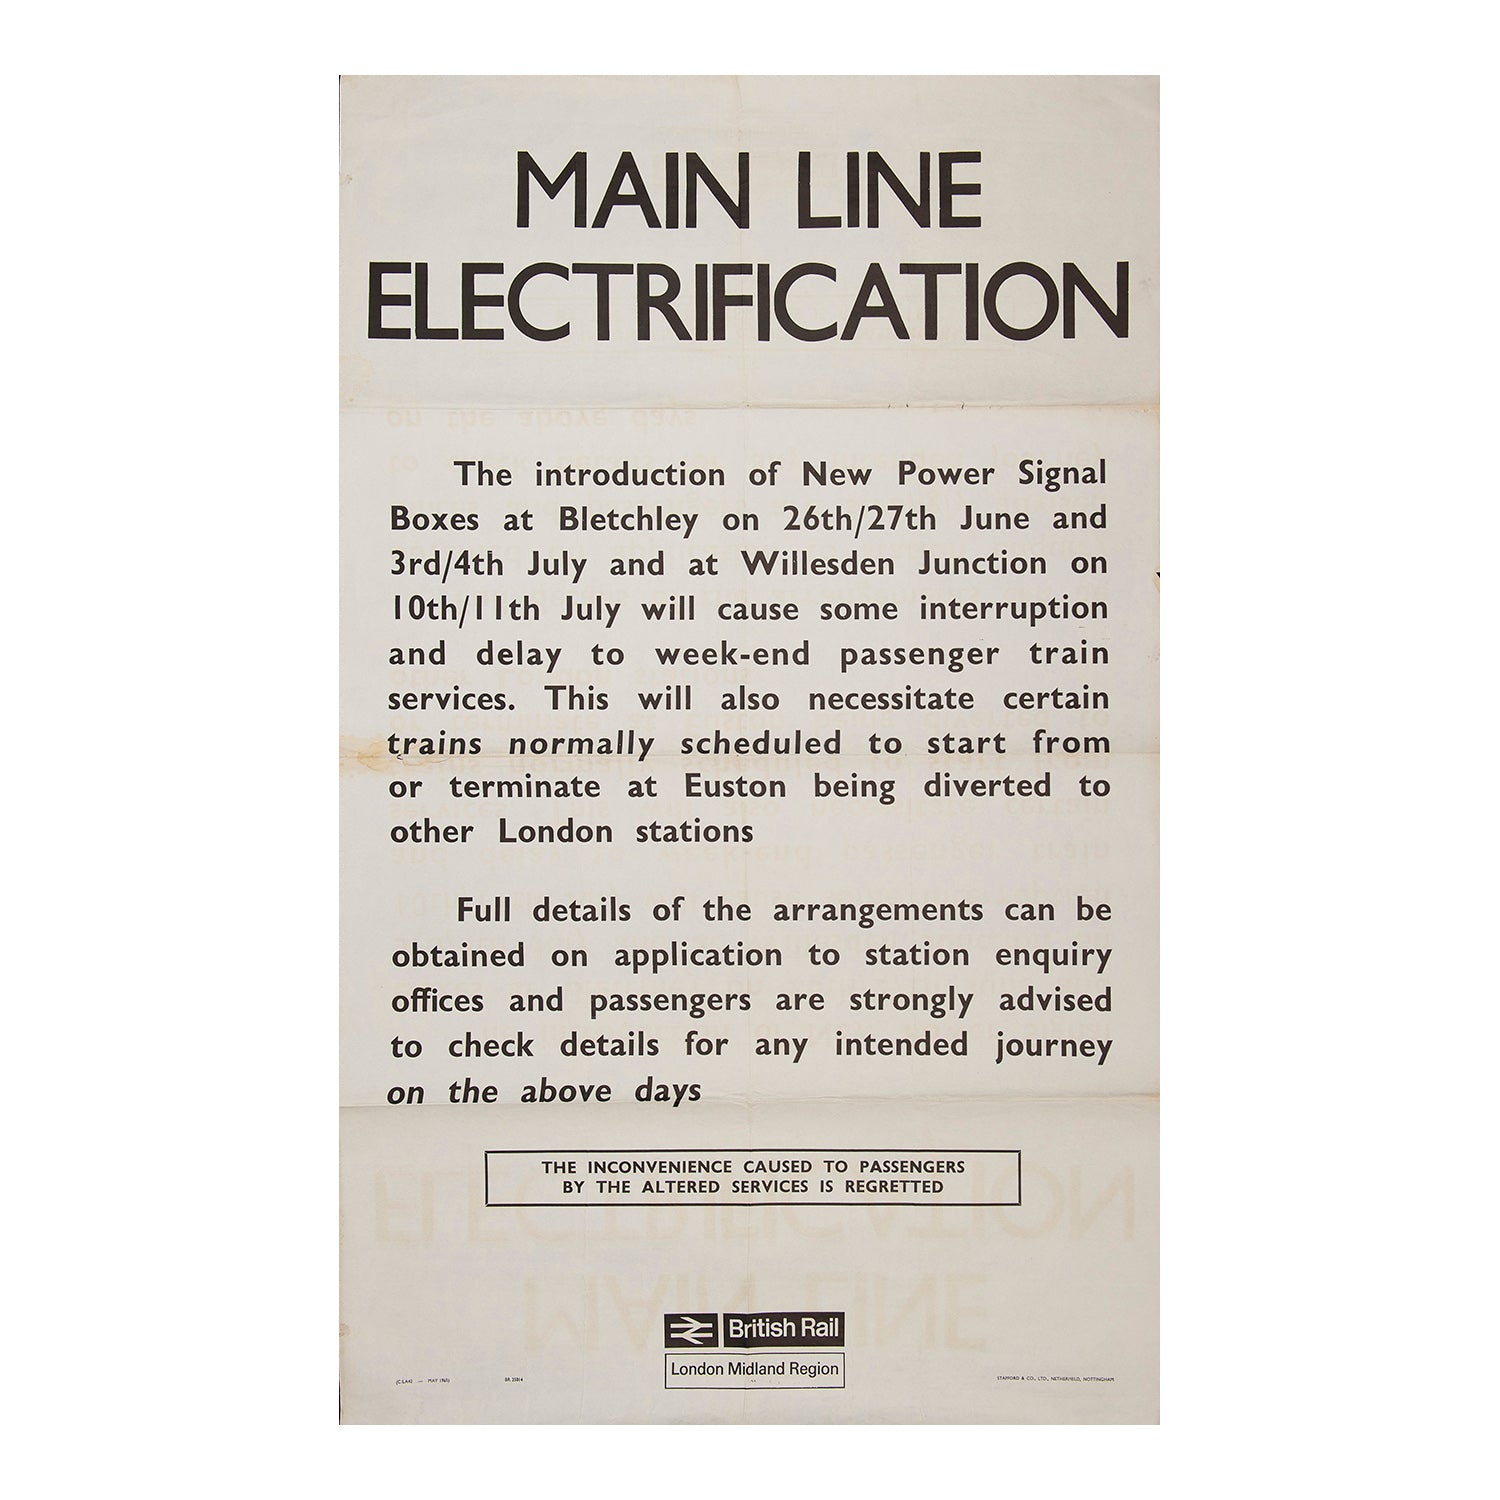 British Rail information poster relating to the installation of New Power Signal Boxes at Bletchley and Willesden Junction as part of the electrification of the West Coast Main Line to London in 1965.